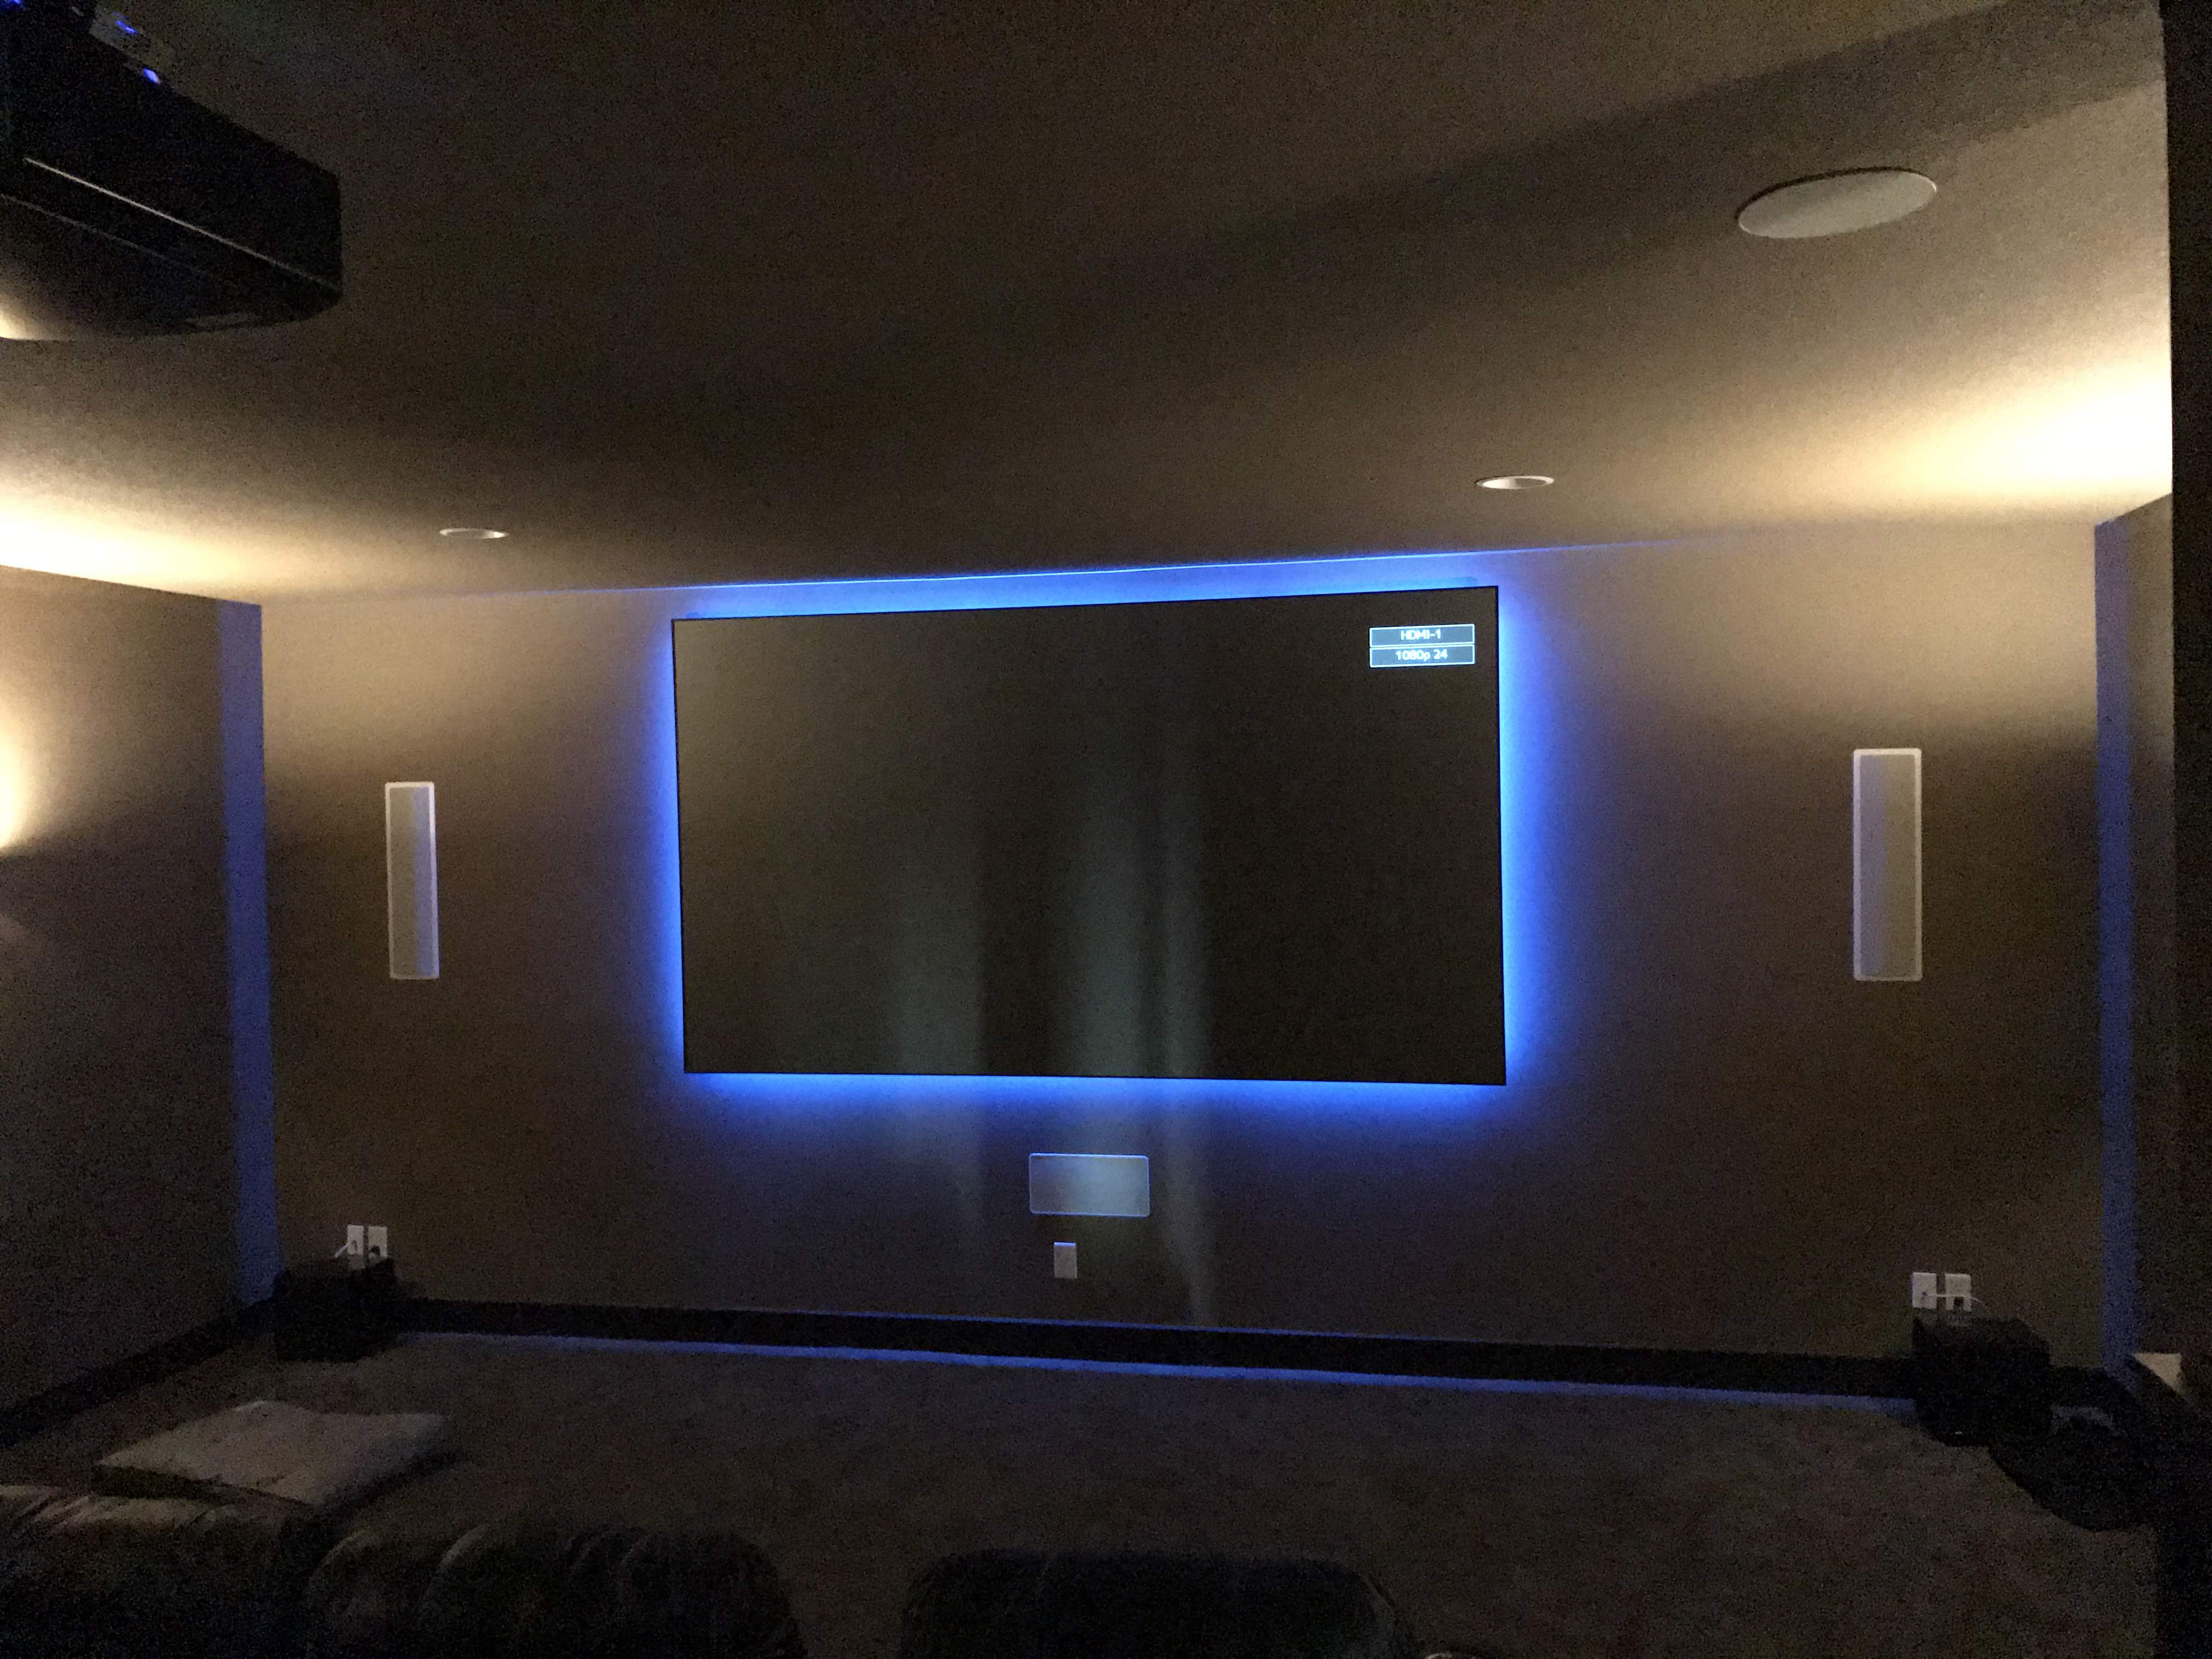 Home theater projections